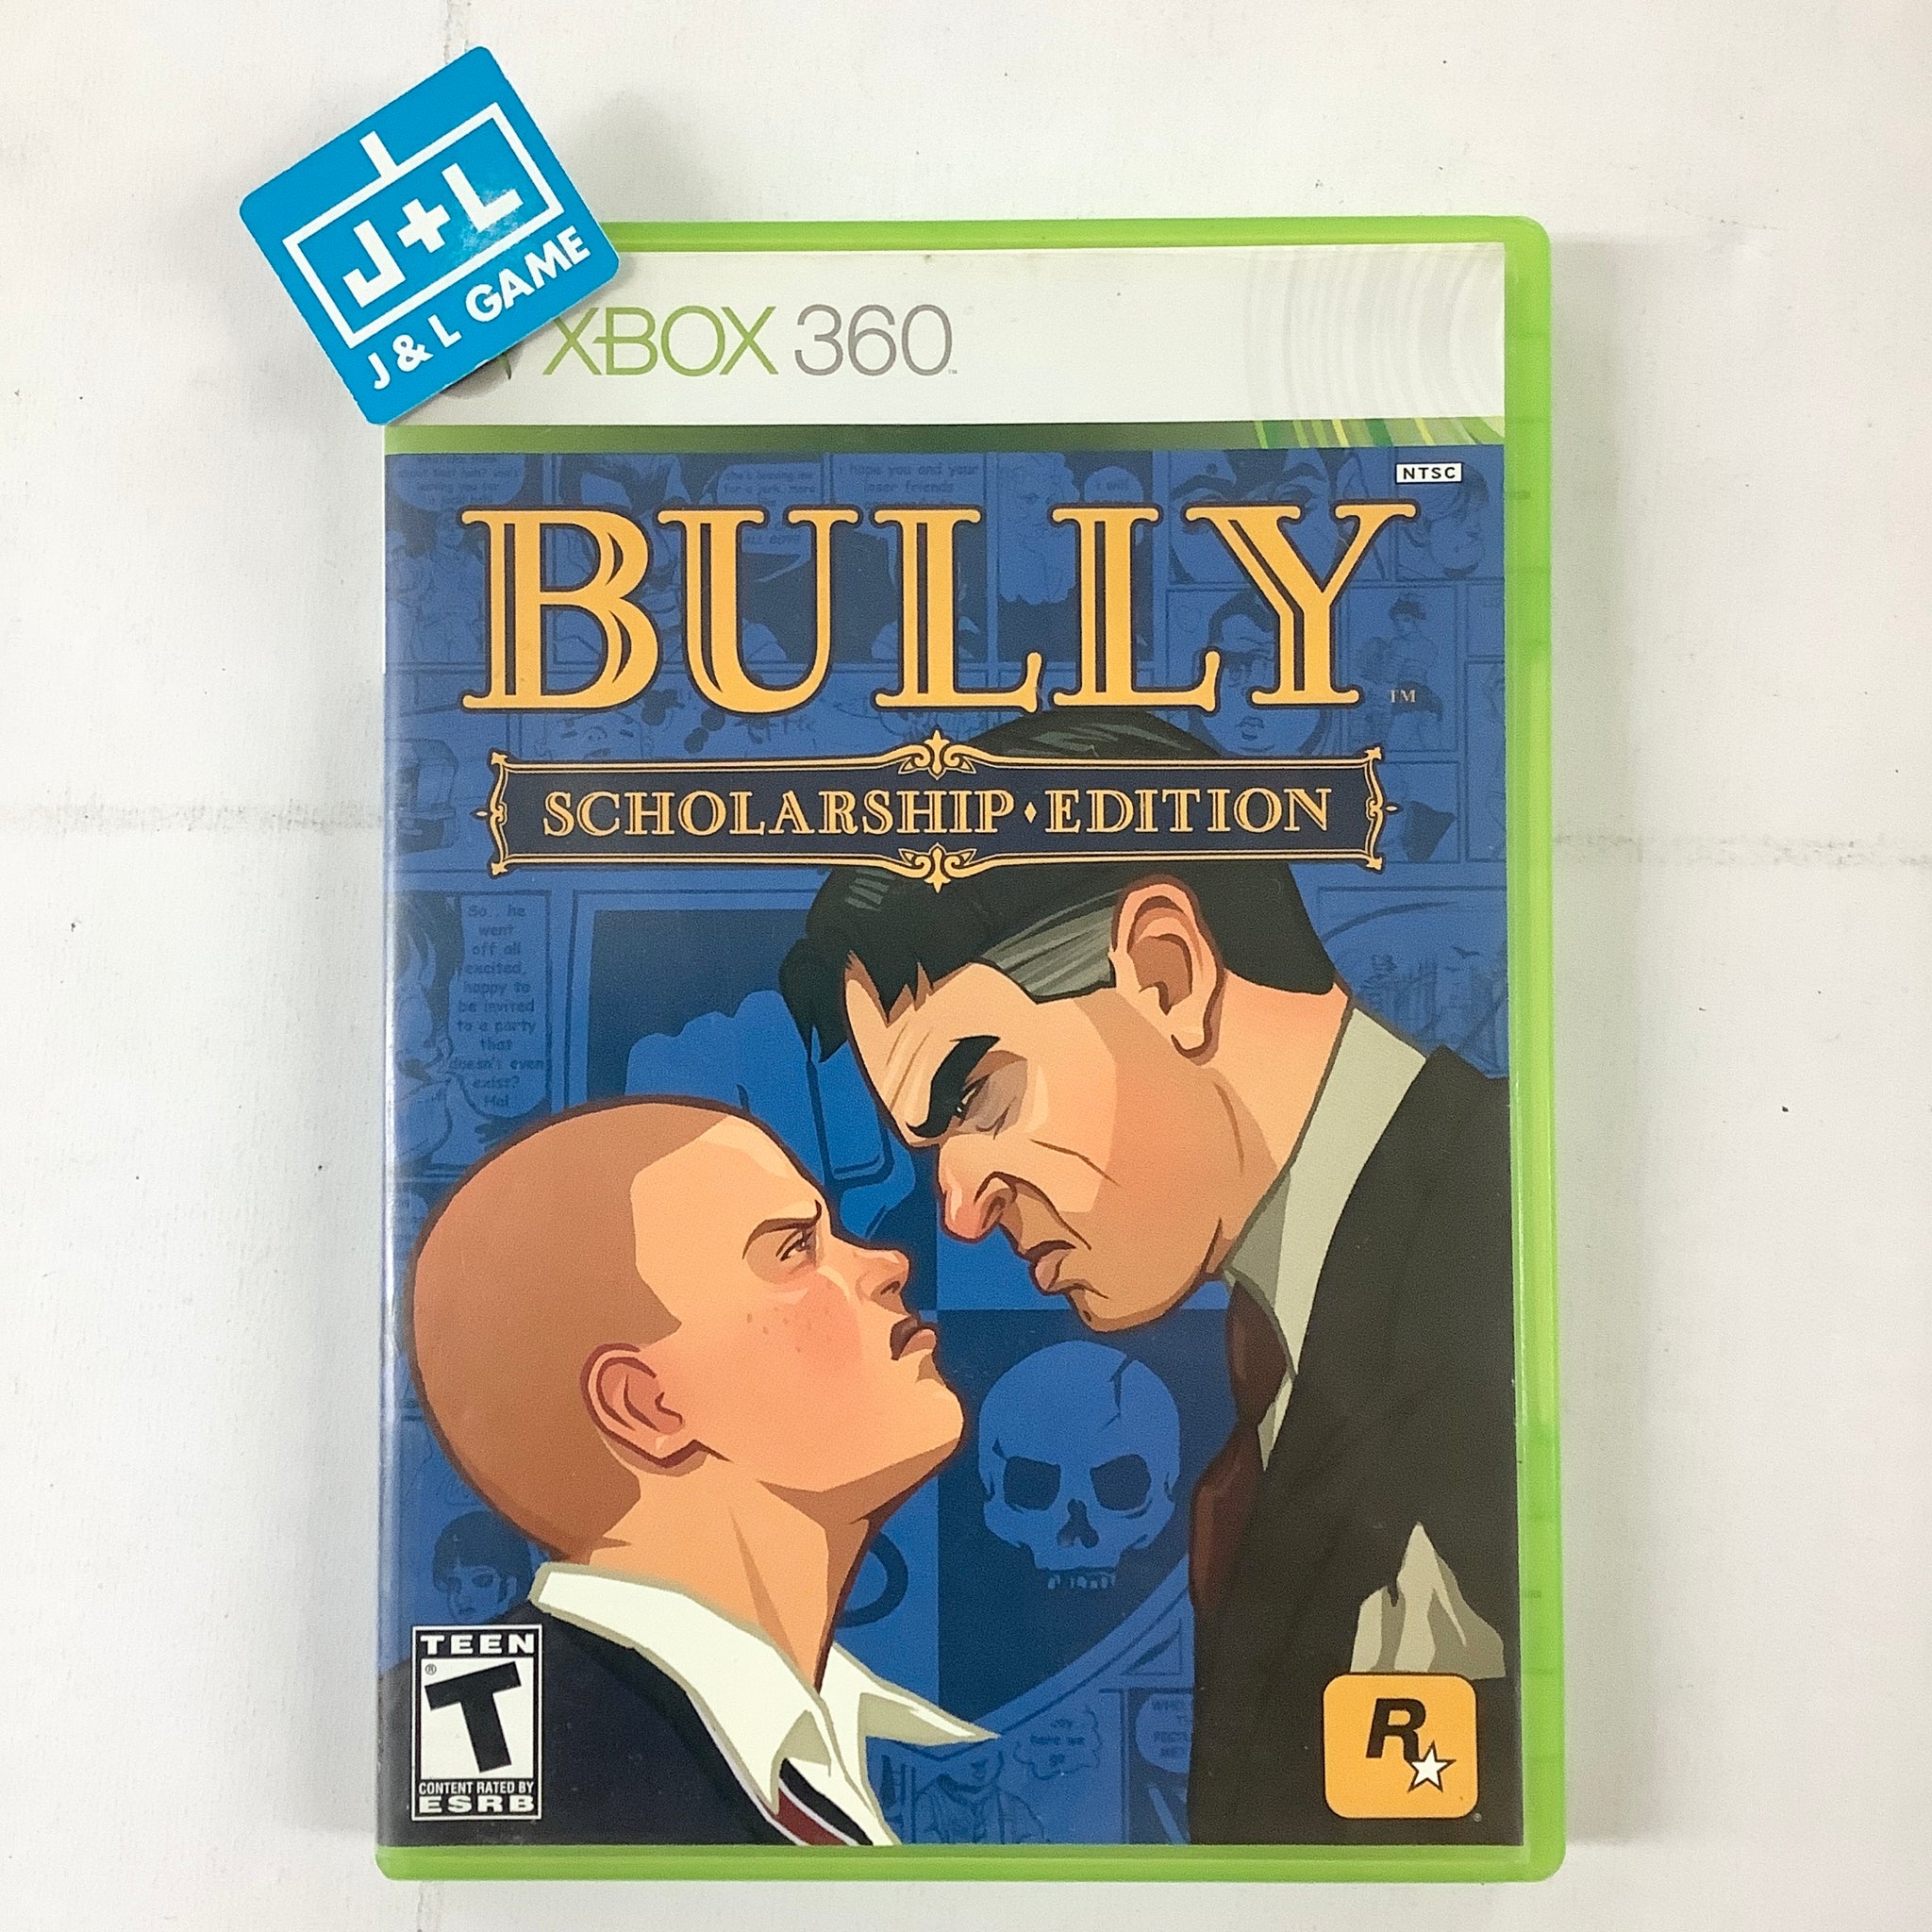 Everything We Know About Rockstar's Bully 2 Game! 2020 Release